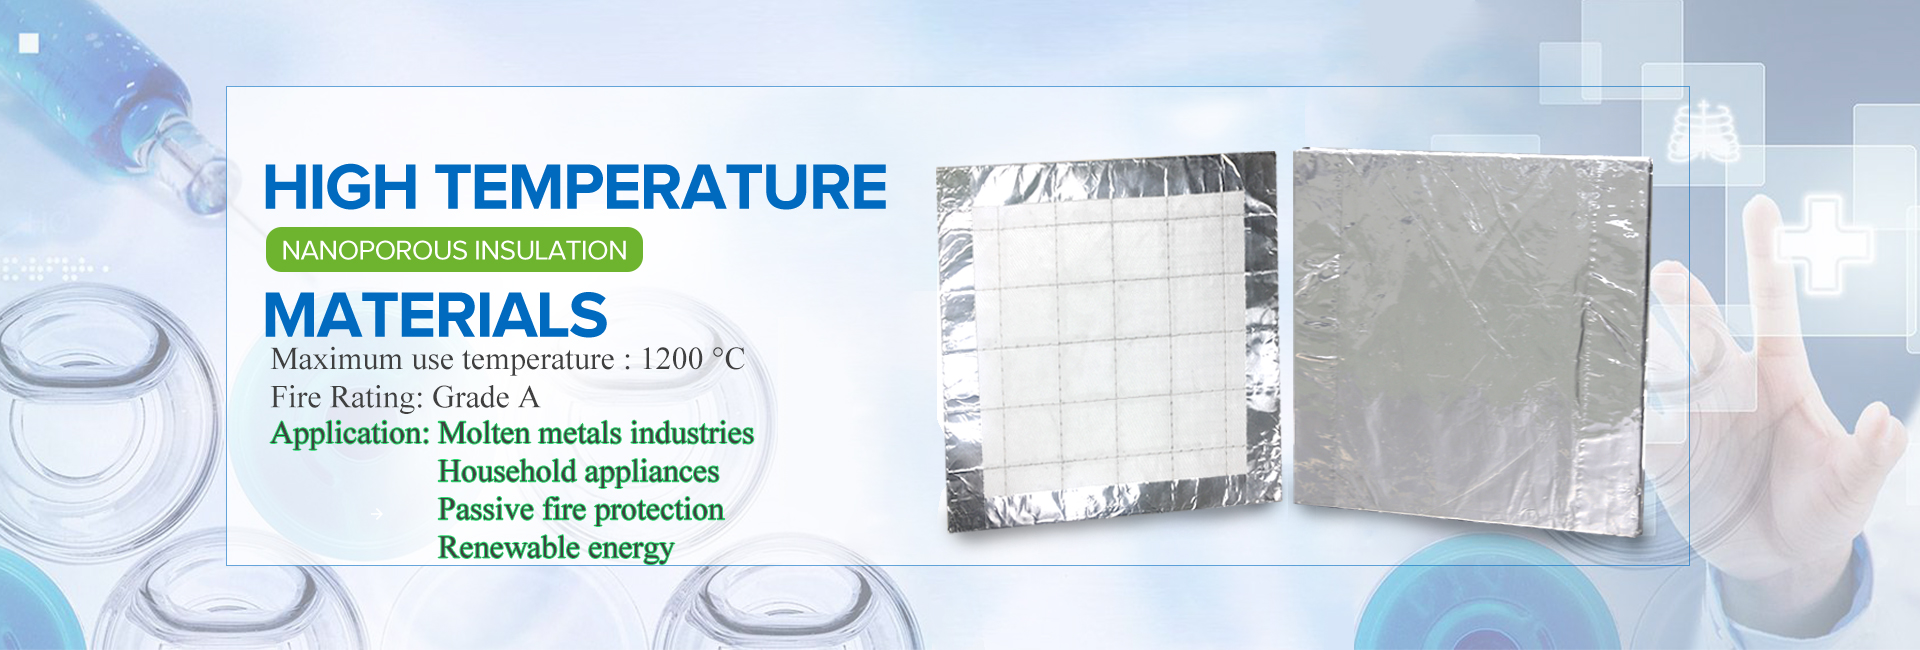 https://www.zerothermolip.com/high-temperature-nano-microporous-slotted-shaped-insulation-panels-product/